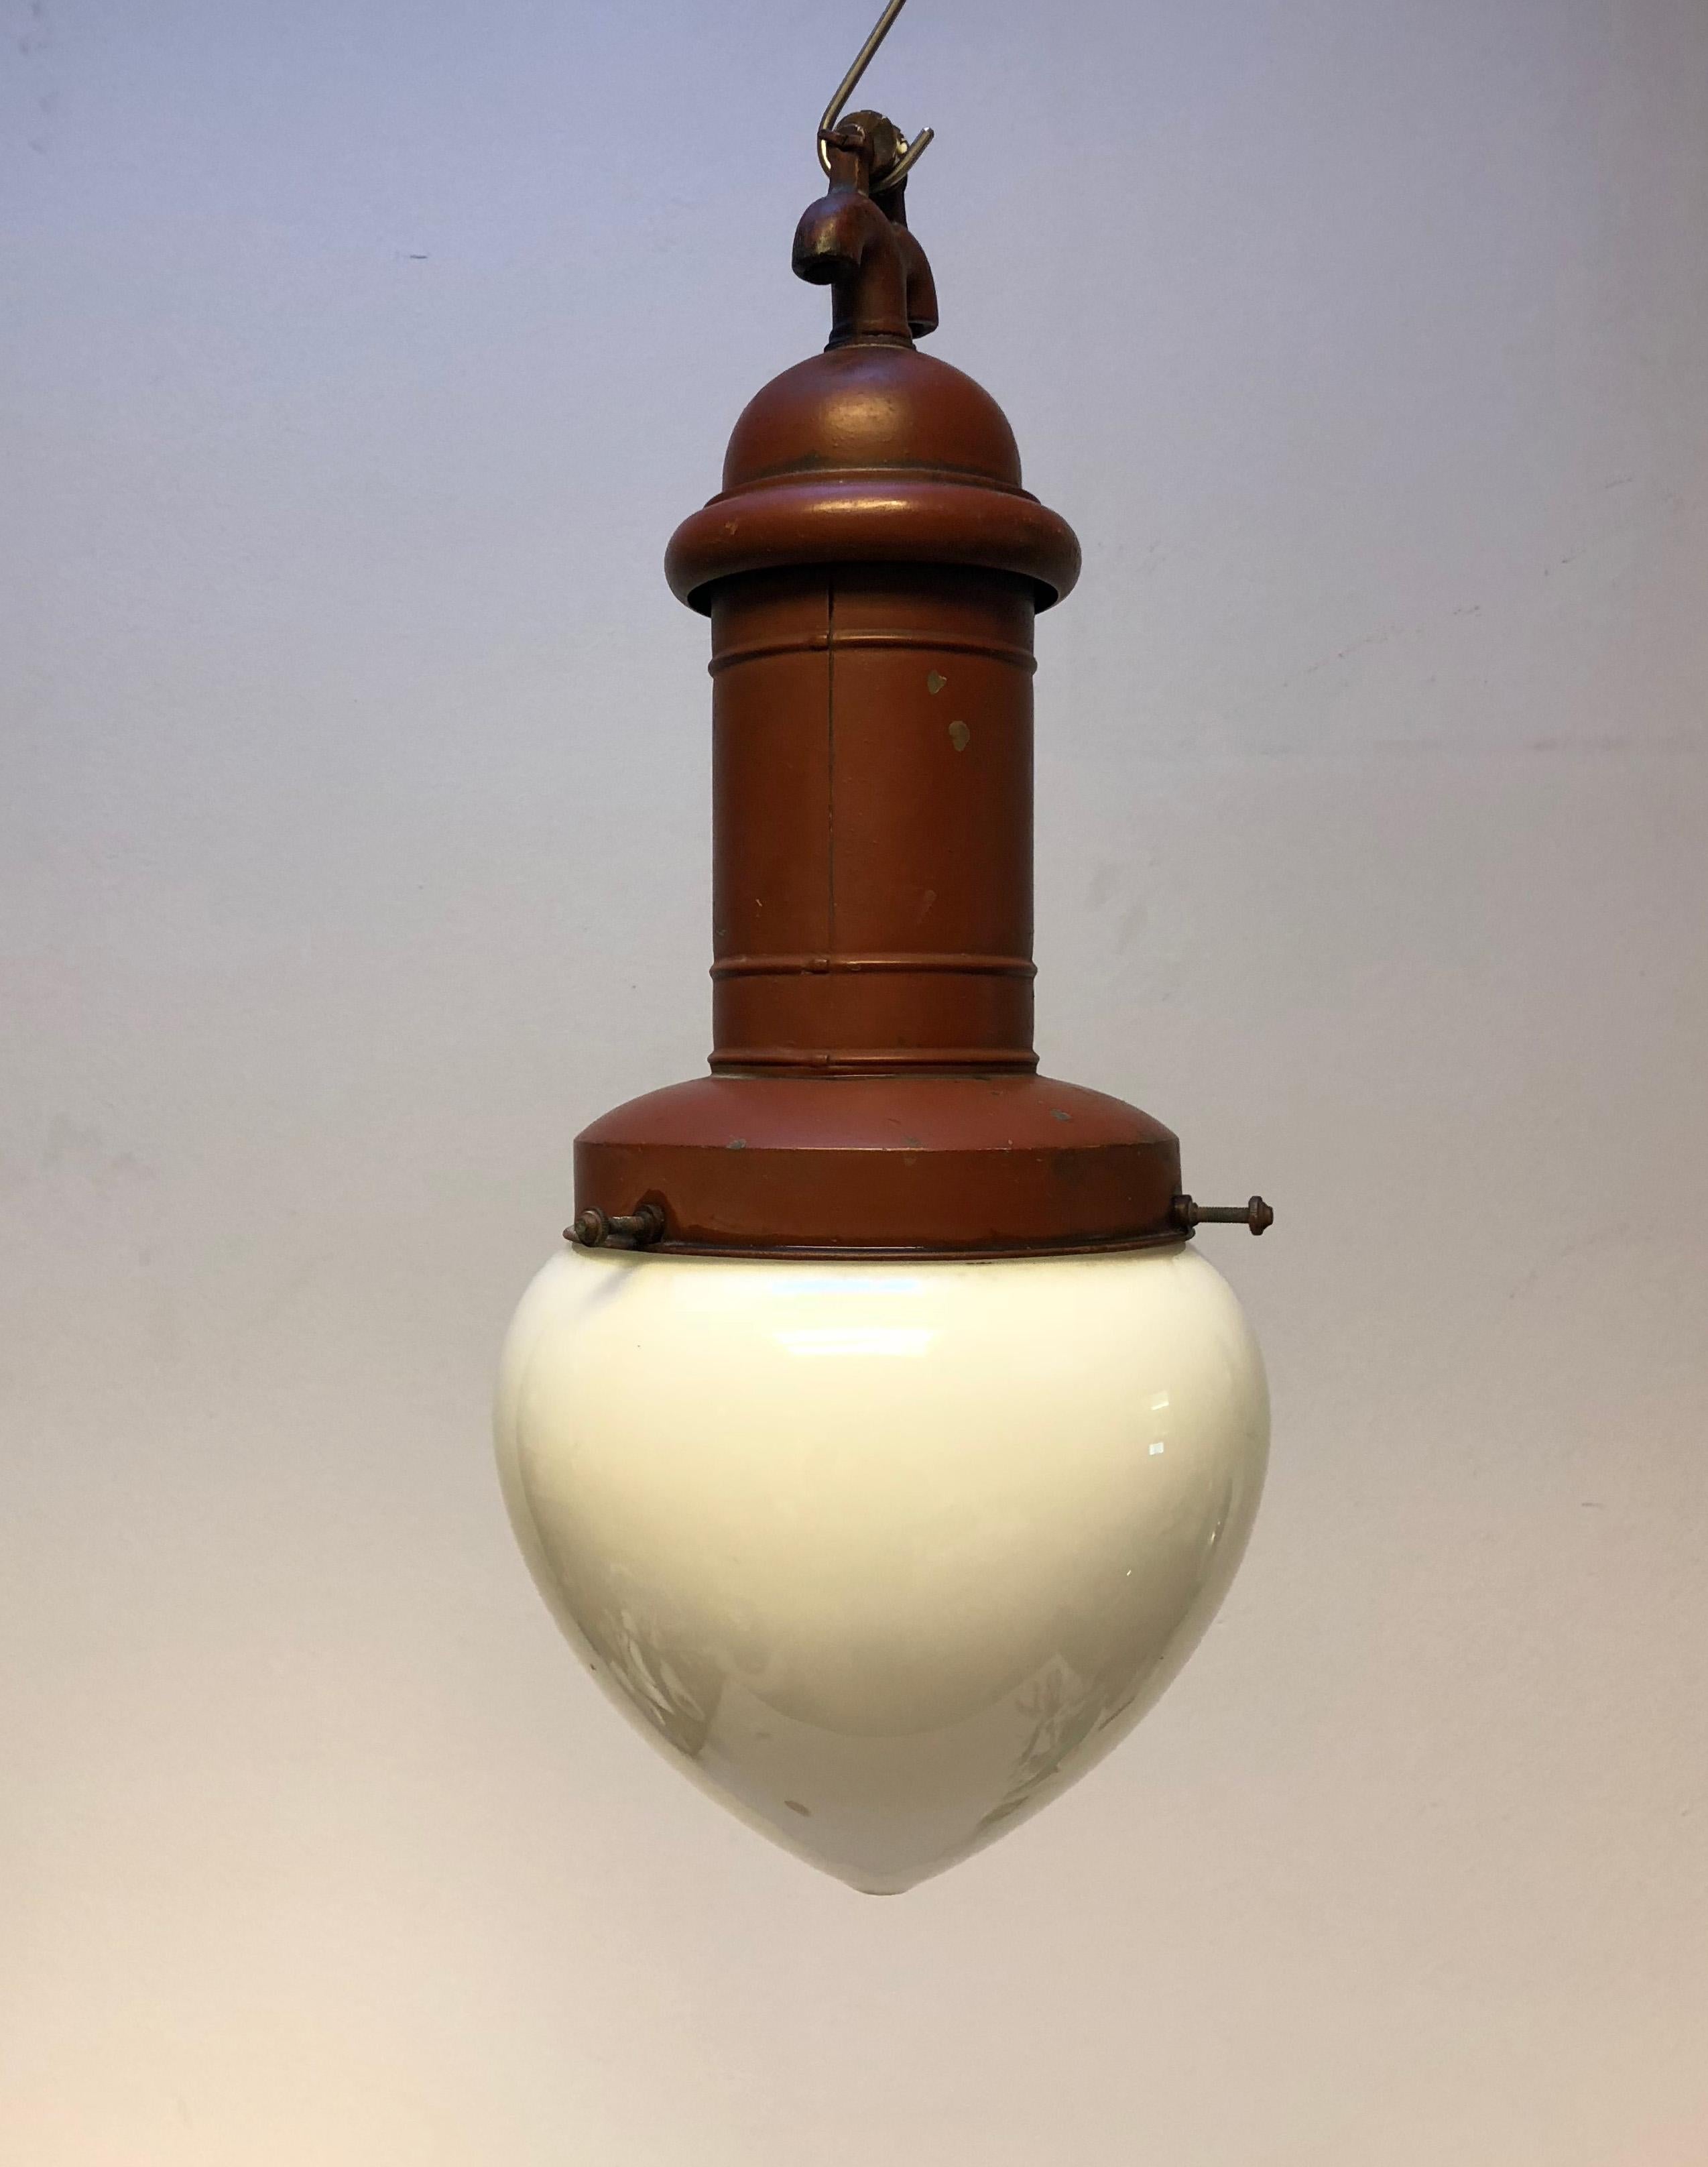 Ceiling pendant from the 1900s. Frame in brass, red-colored, with large opaline glass shade.
Dimensions ca: H 65 cm, D 25 cm.
Traces of wear commensurate with age, some scratches.
2 pieces awailable price/piece